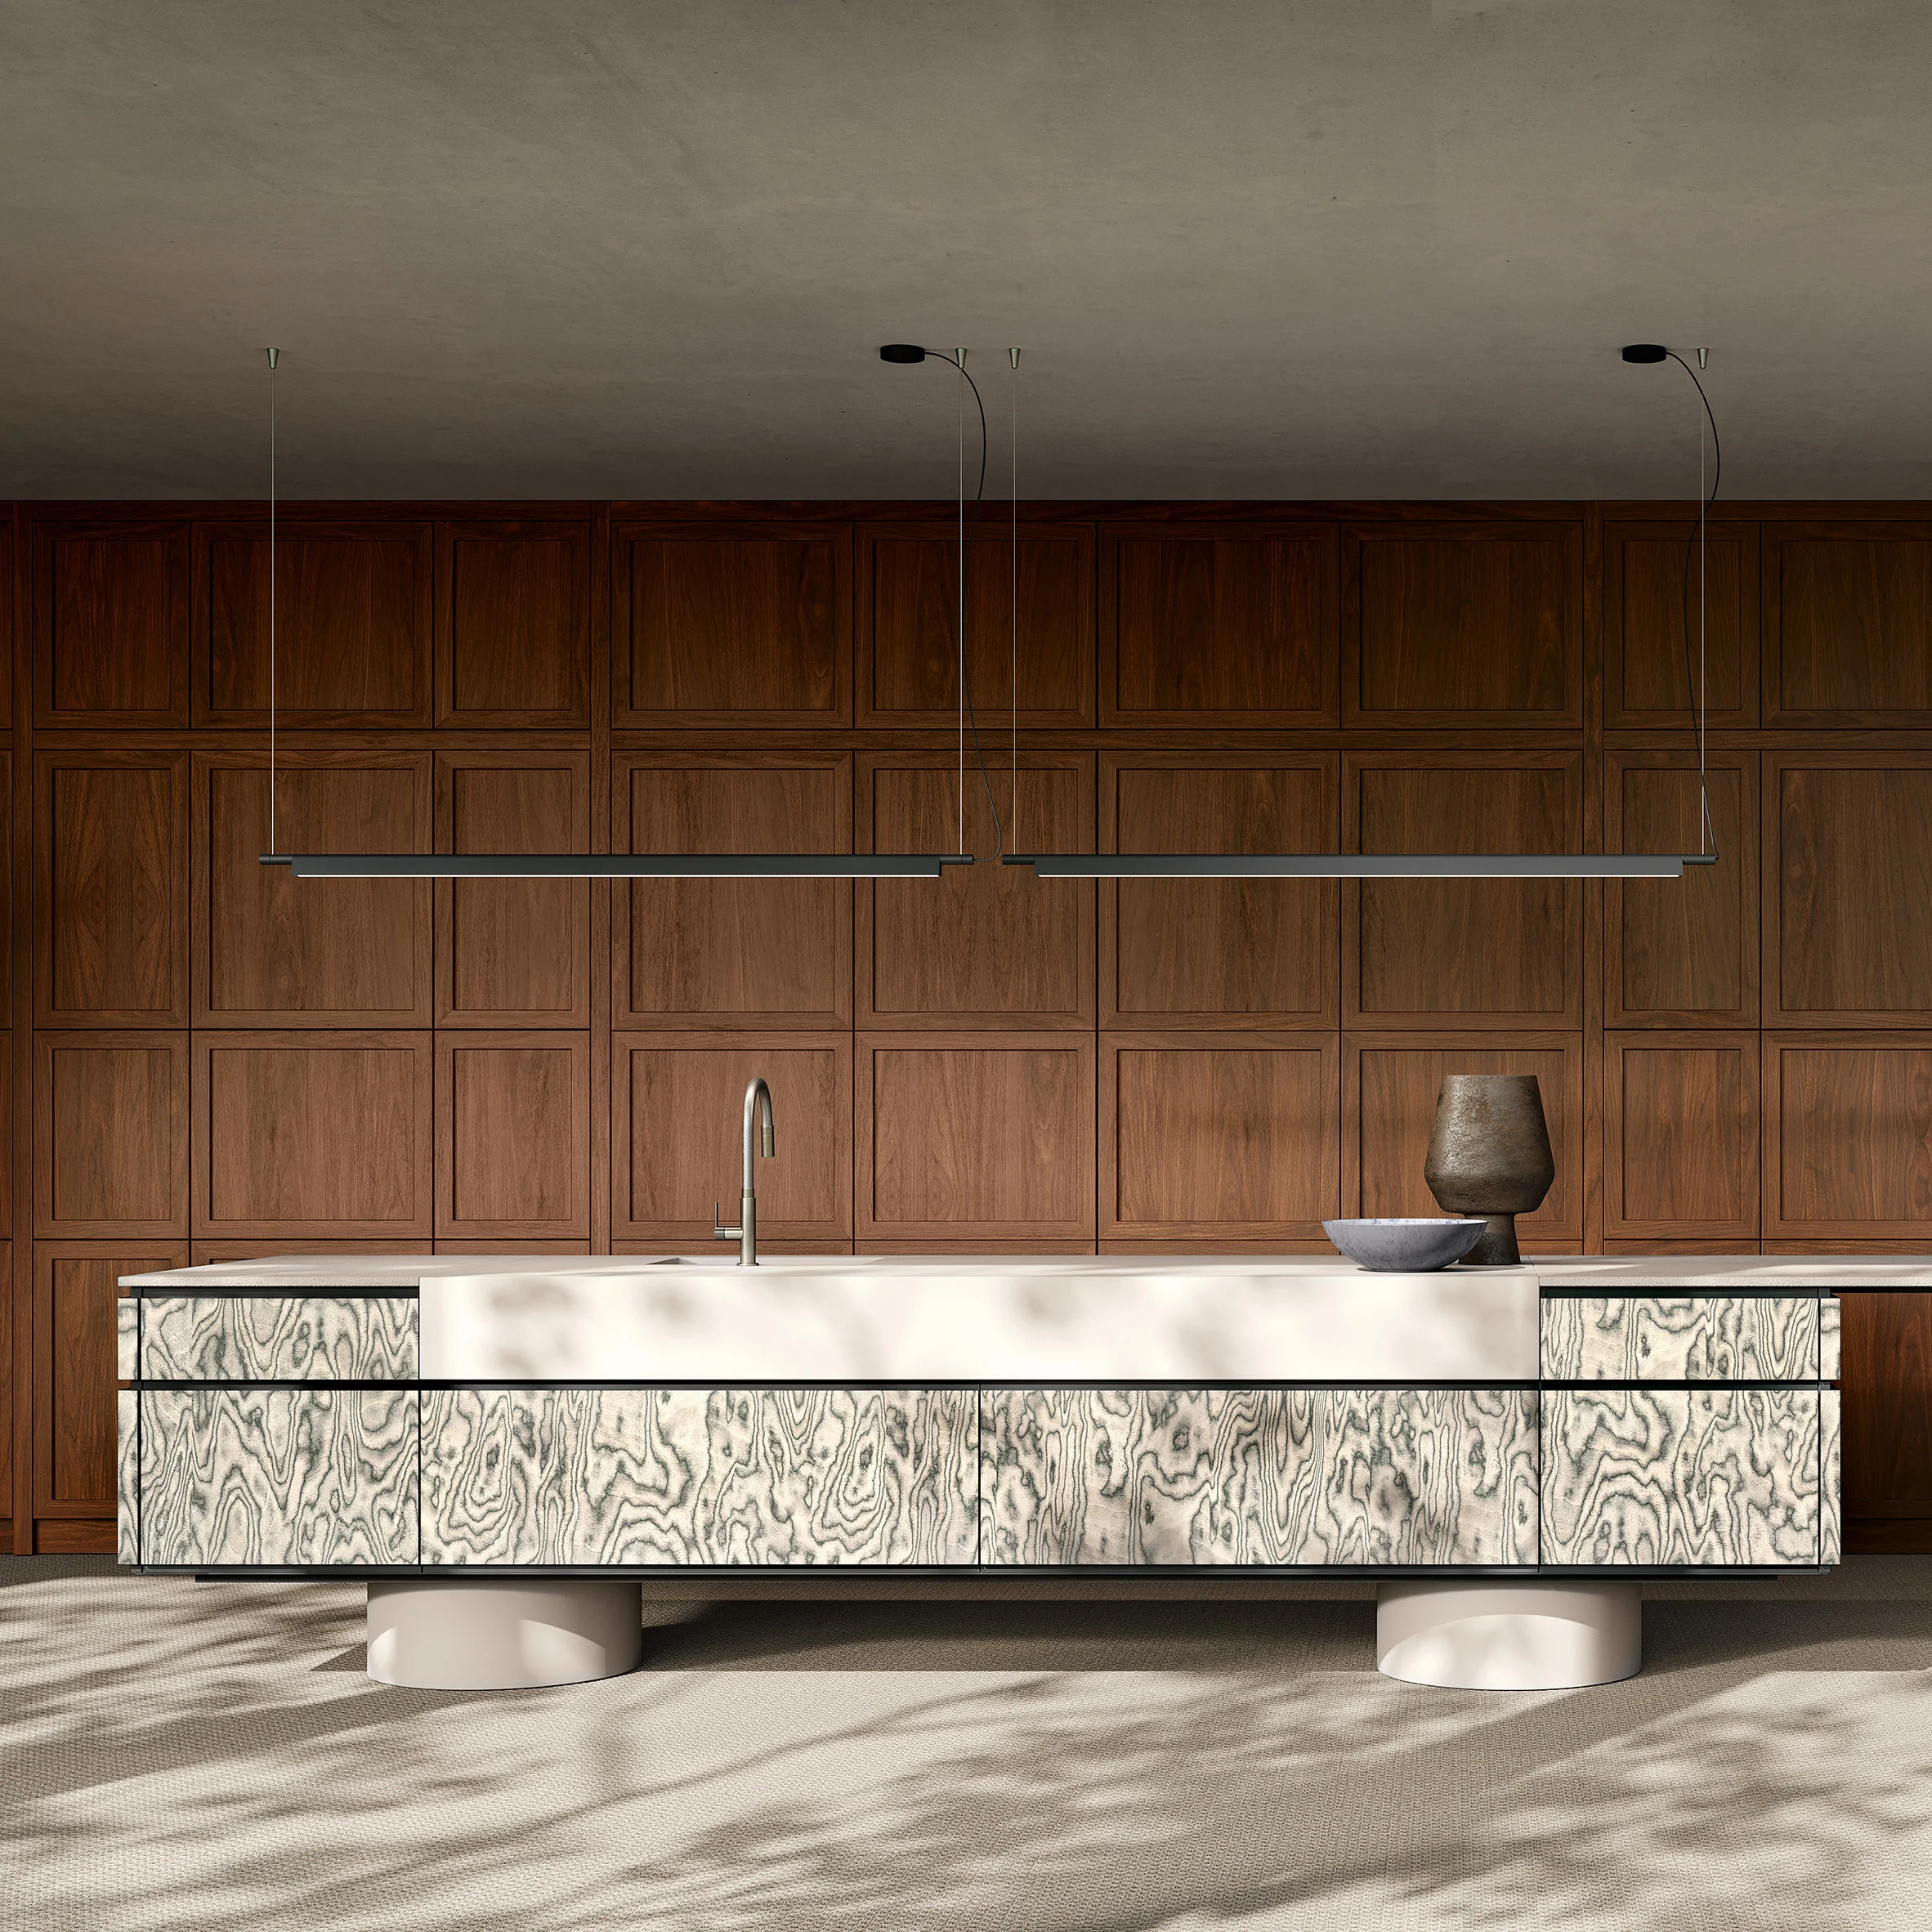 Atlante panelling and kitchen island by L'ottocento